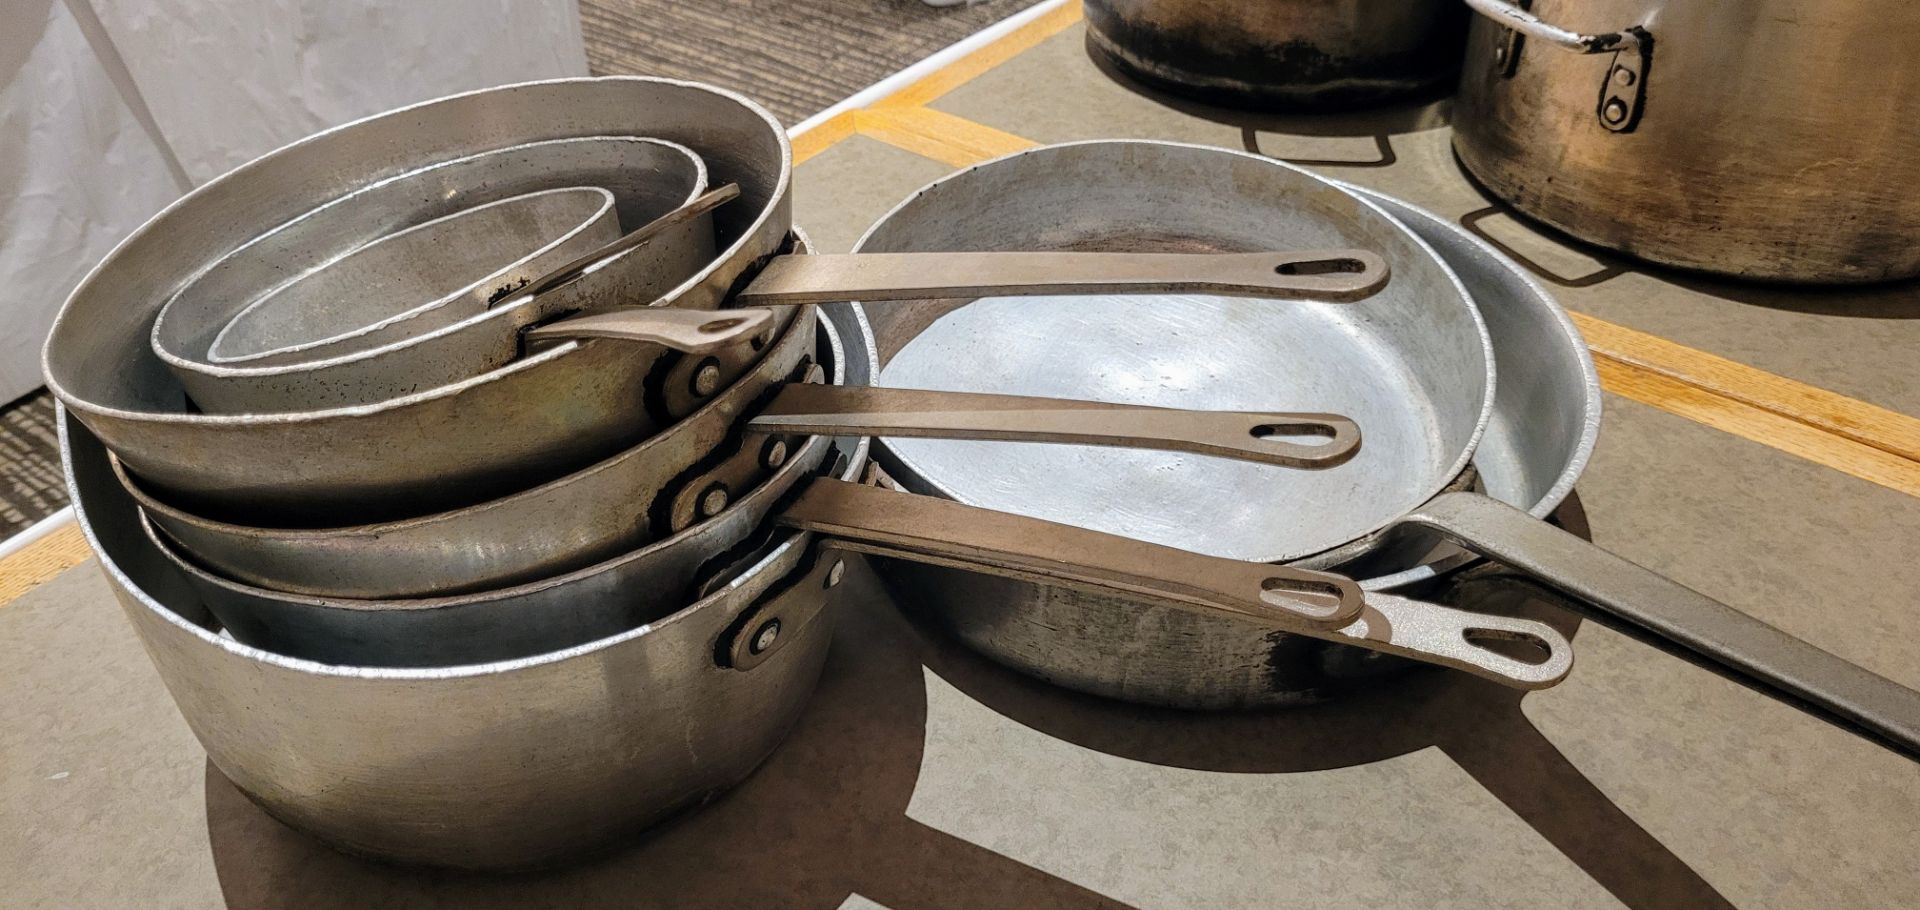 LOT - COMMERCIAL STEEL POTS AND PANS - Image 2 of 2